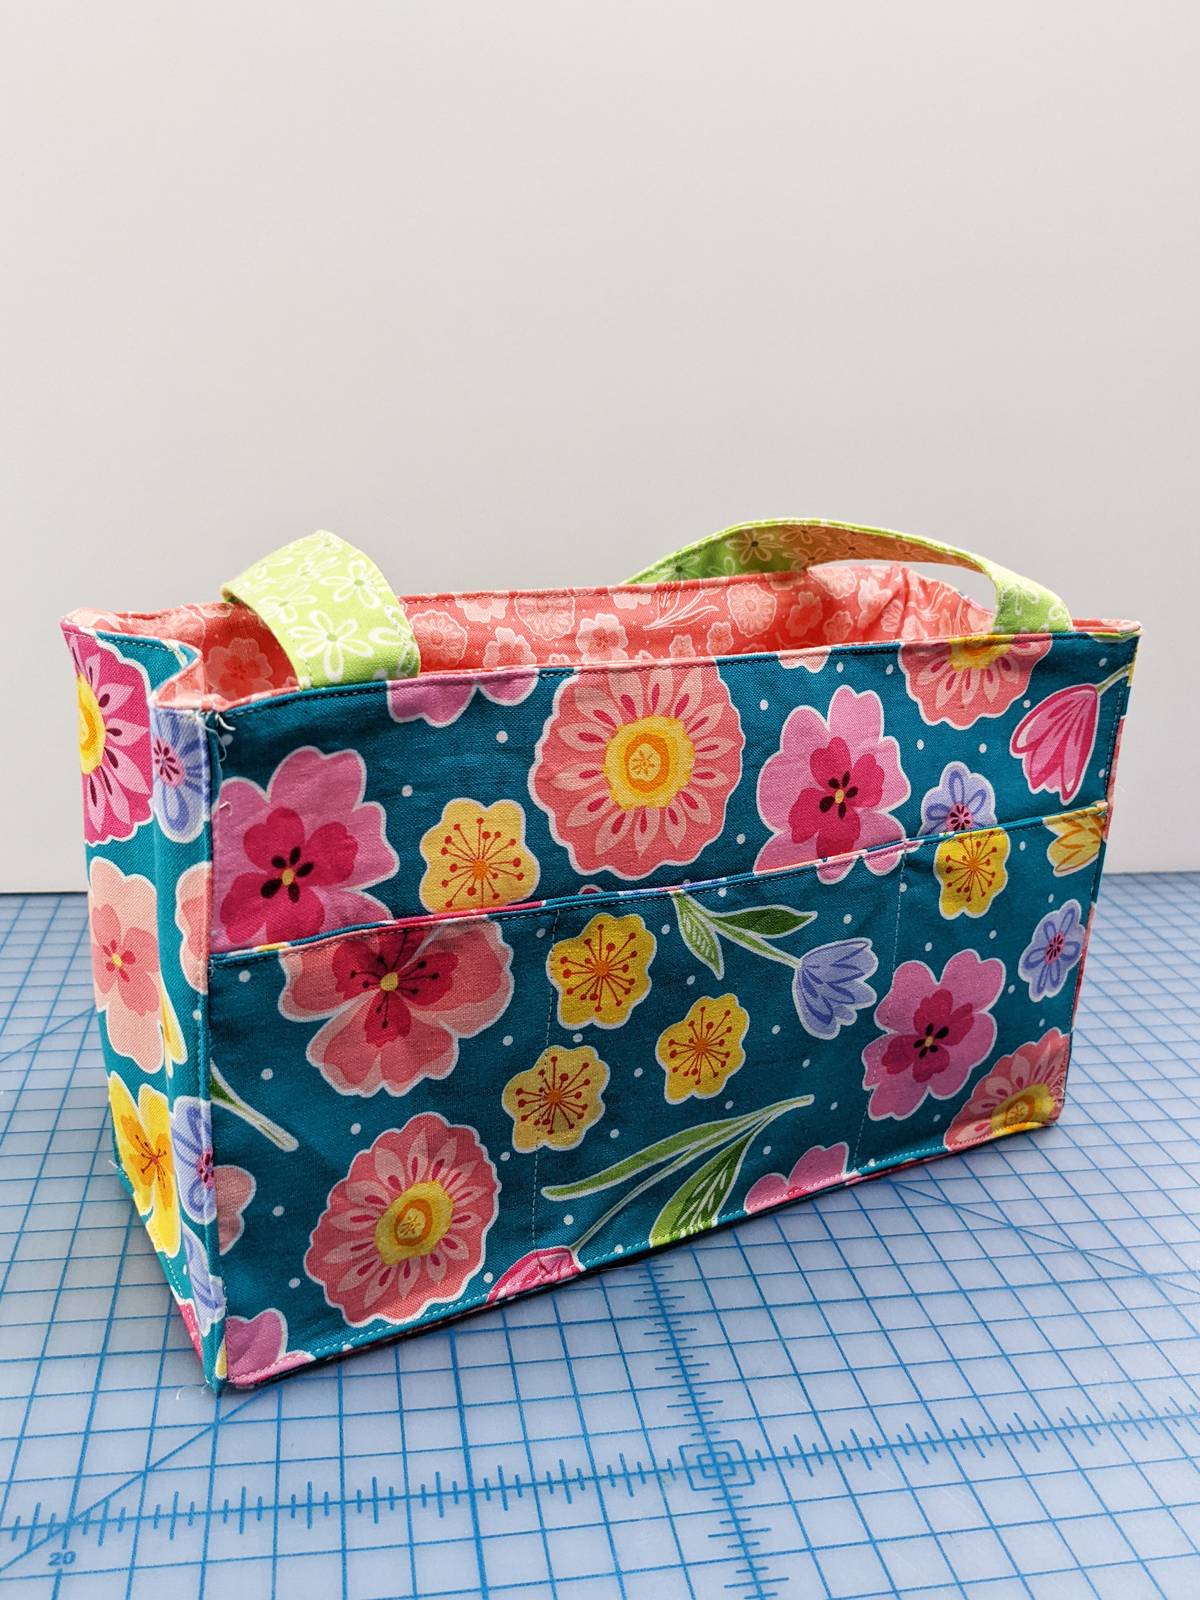 Notions Catch-all Tote Bag FREE sewing tutorial (with video) - Sew ...